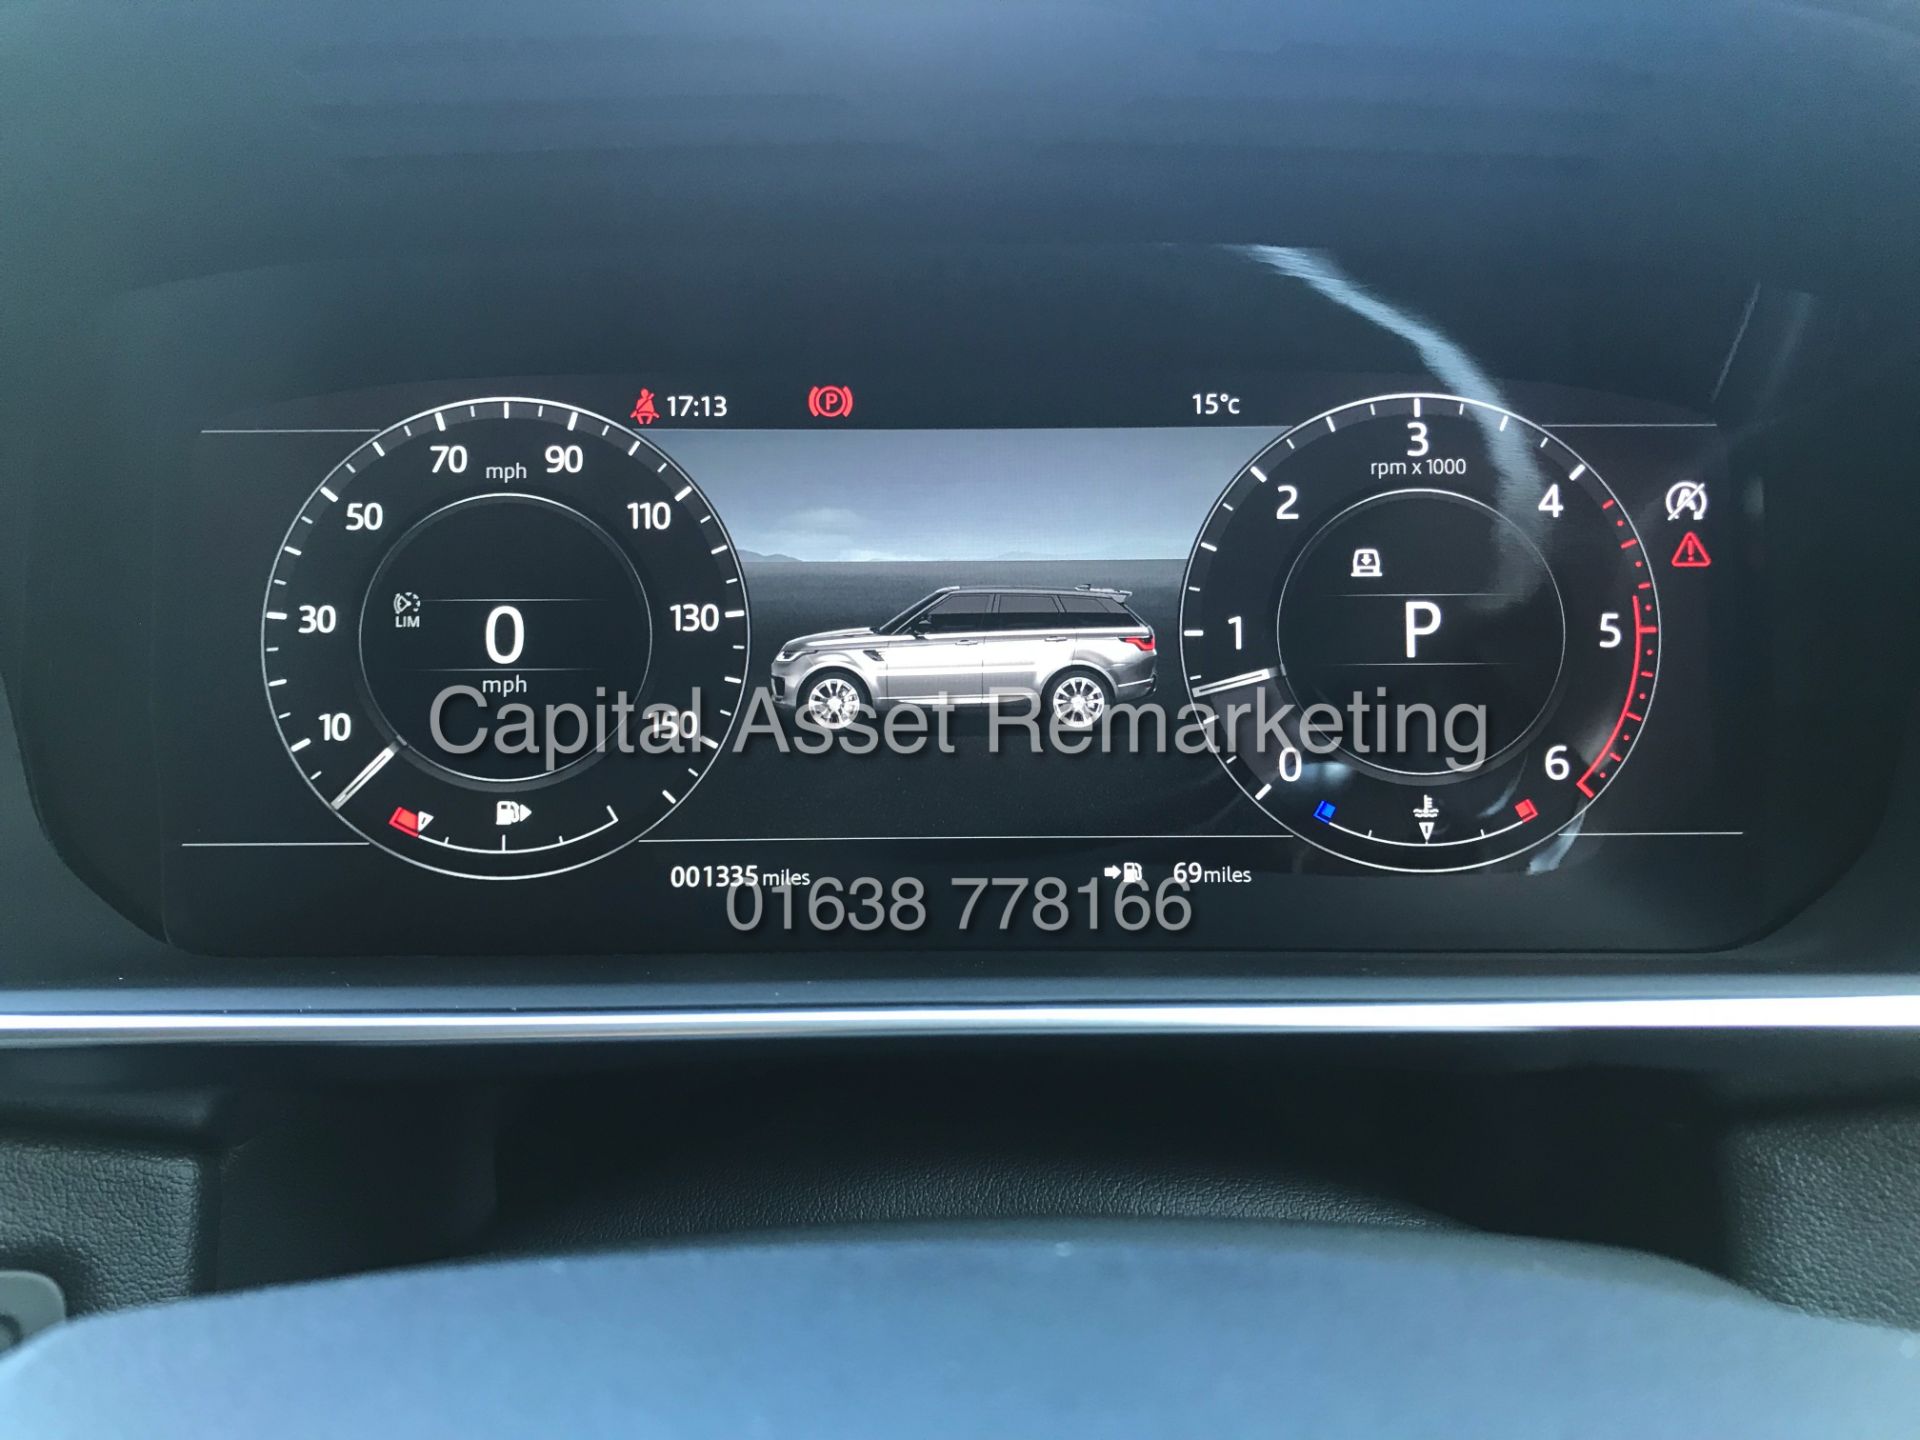 On Sale RANGE ROVER SPORT "HSE" 3.0 SDV6 AUTO (2019) FULLY LOADED - SAT NAV - PAN ROOF- FULL LEATHER - Image 21 of 35